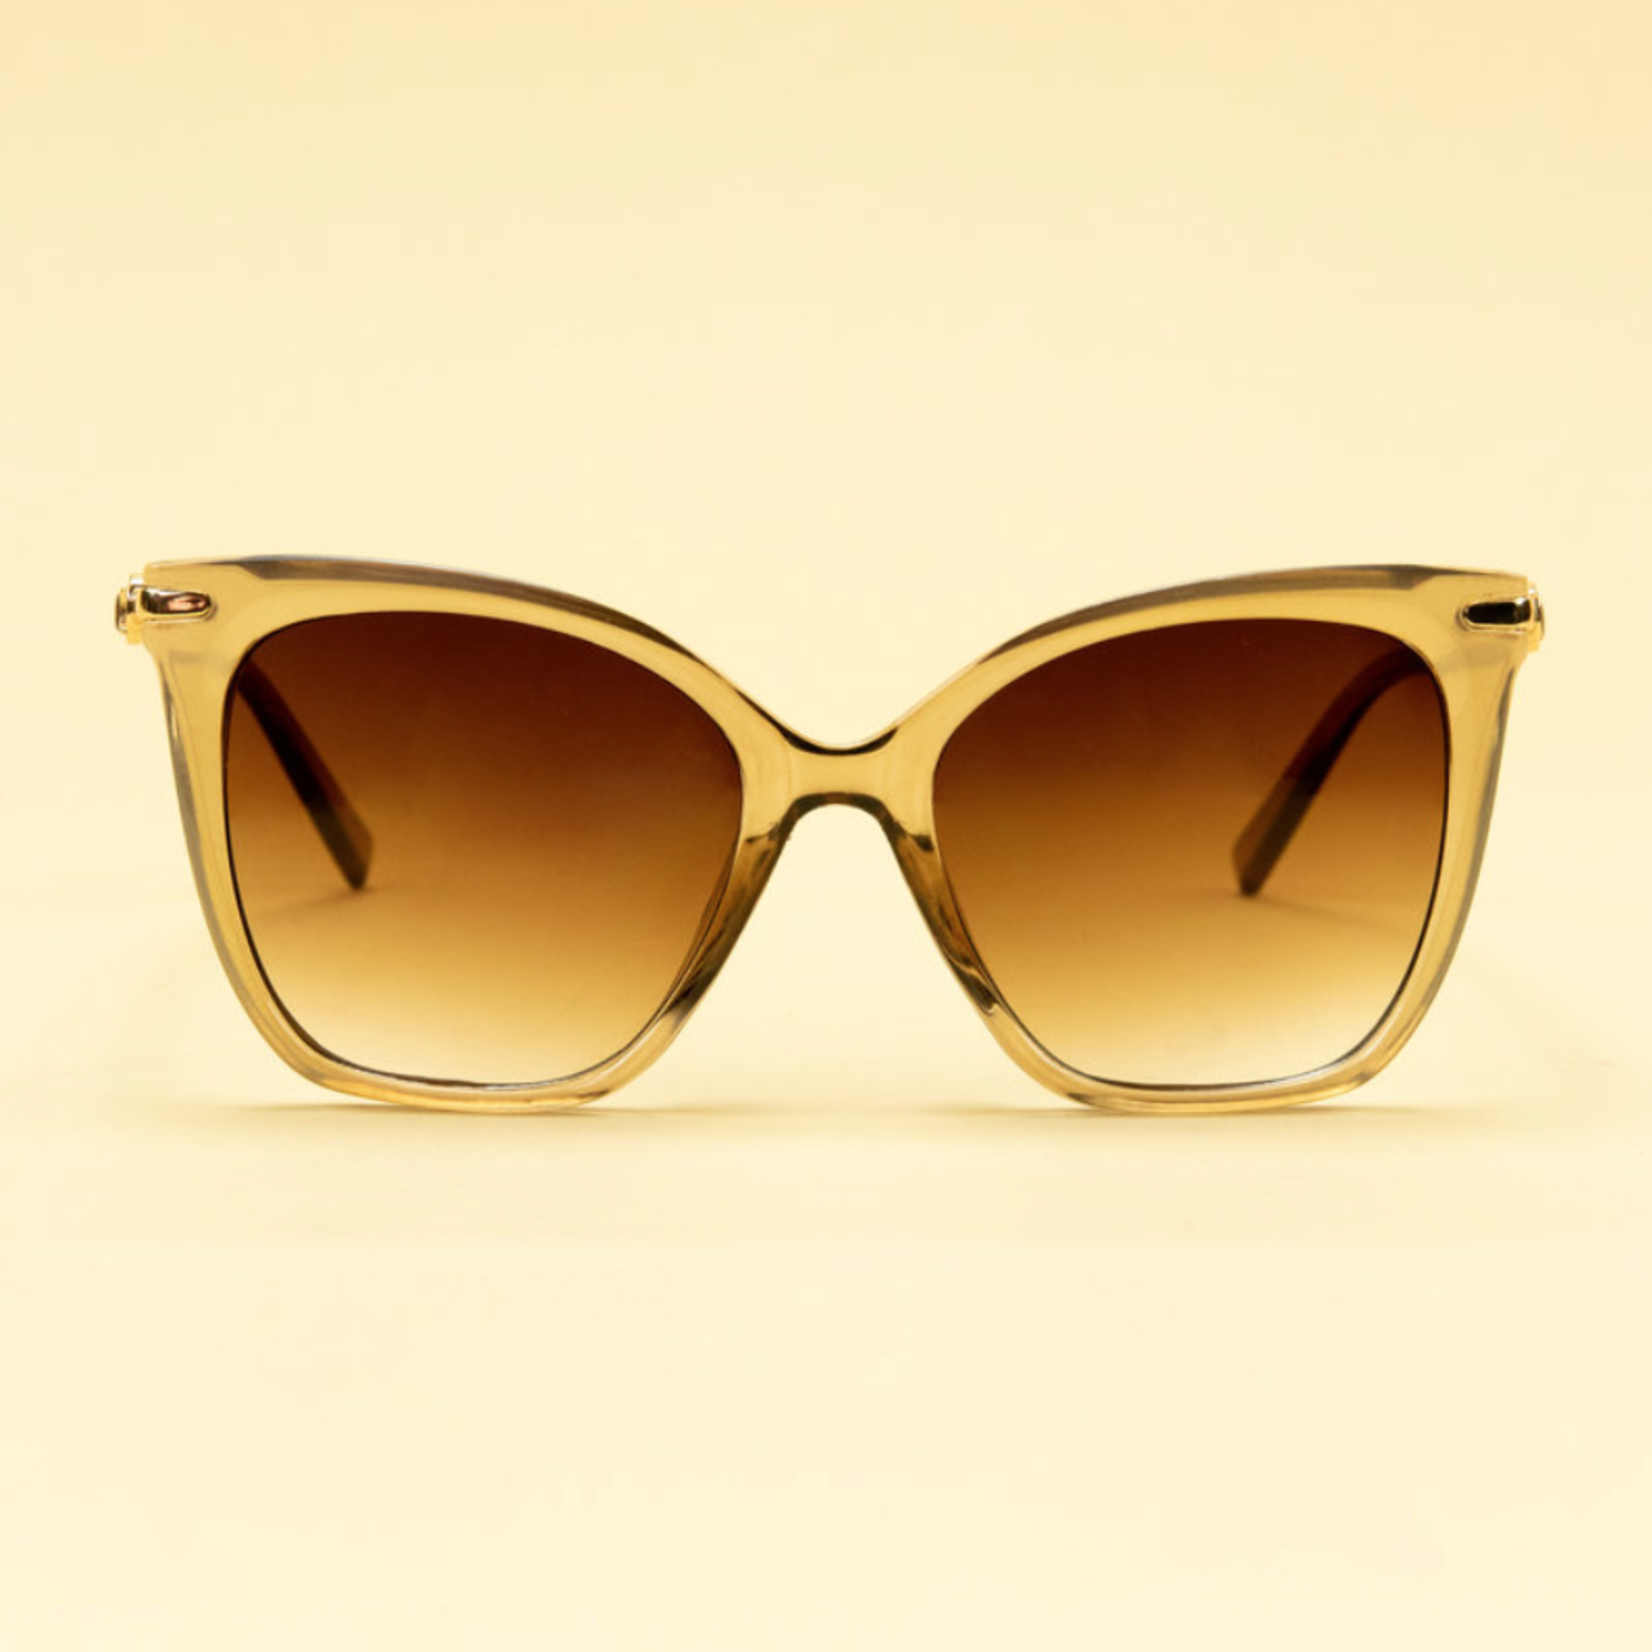 Rochelle Limited Edition Sunglasses - Iced Latte